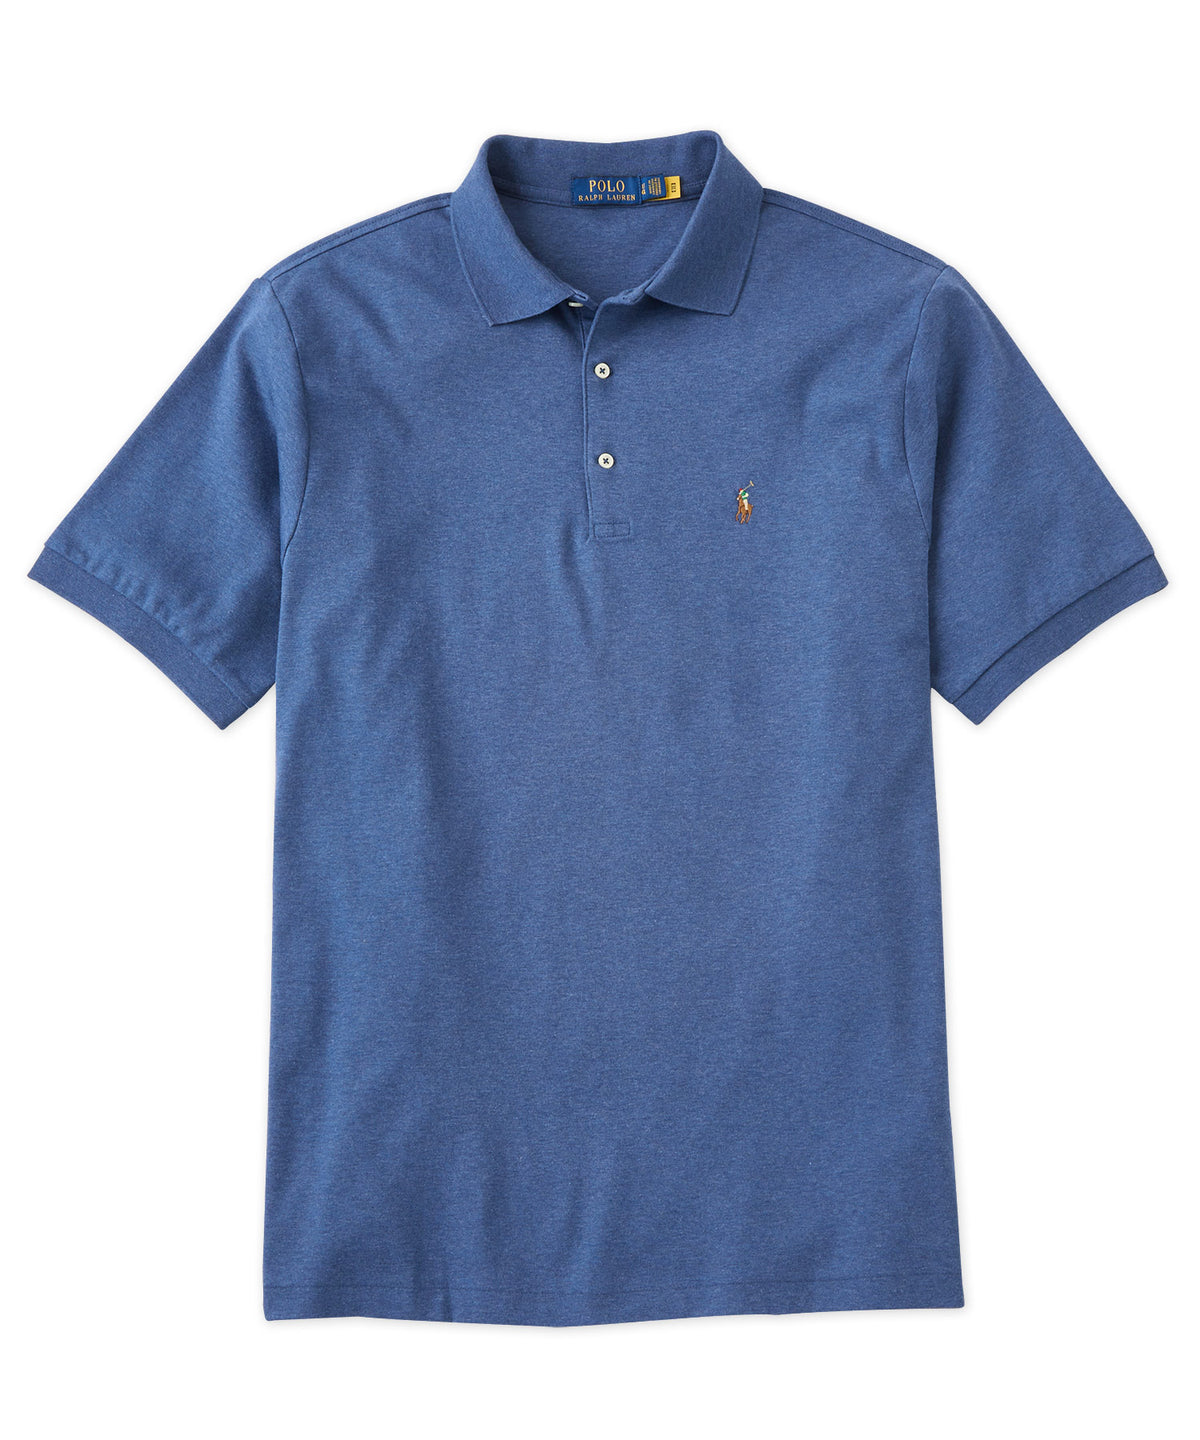 Polo Ralph Lauren Short Sleeve Classic Fit Soft Touch Pima Cotton Polo -  Westport Big & Tall